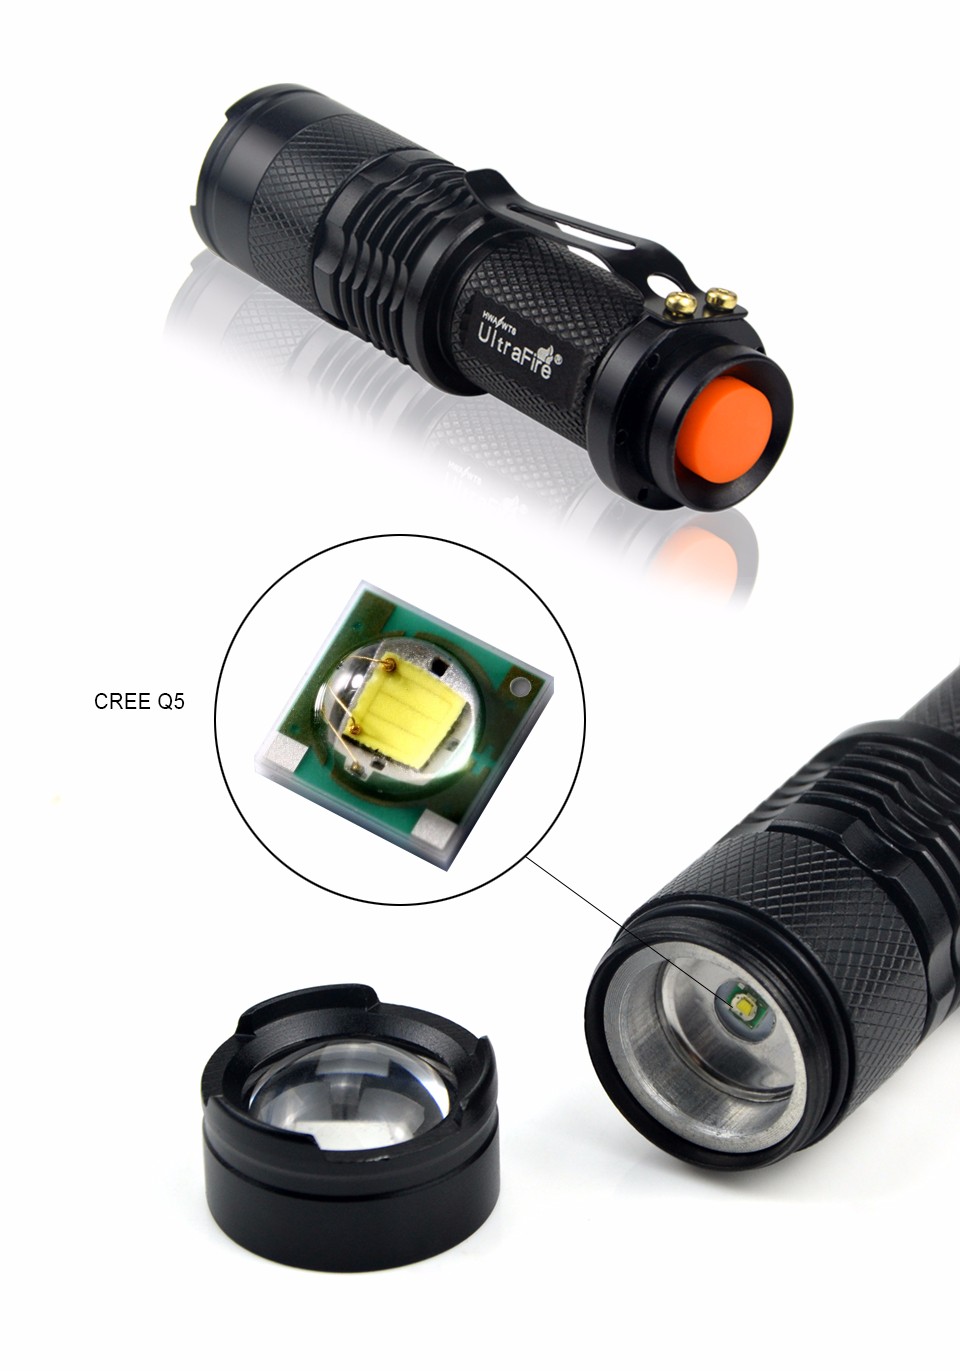 Portable 1000LM CREE Q5 LED Flashlight 3 Modes Zoomable Aluminum Waterproof Torch light For Camping Outdoor Emergency light